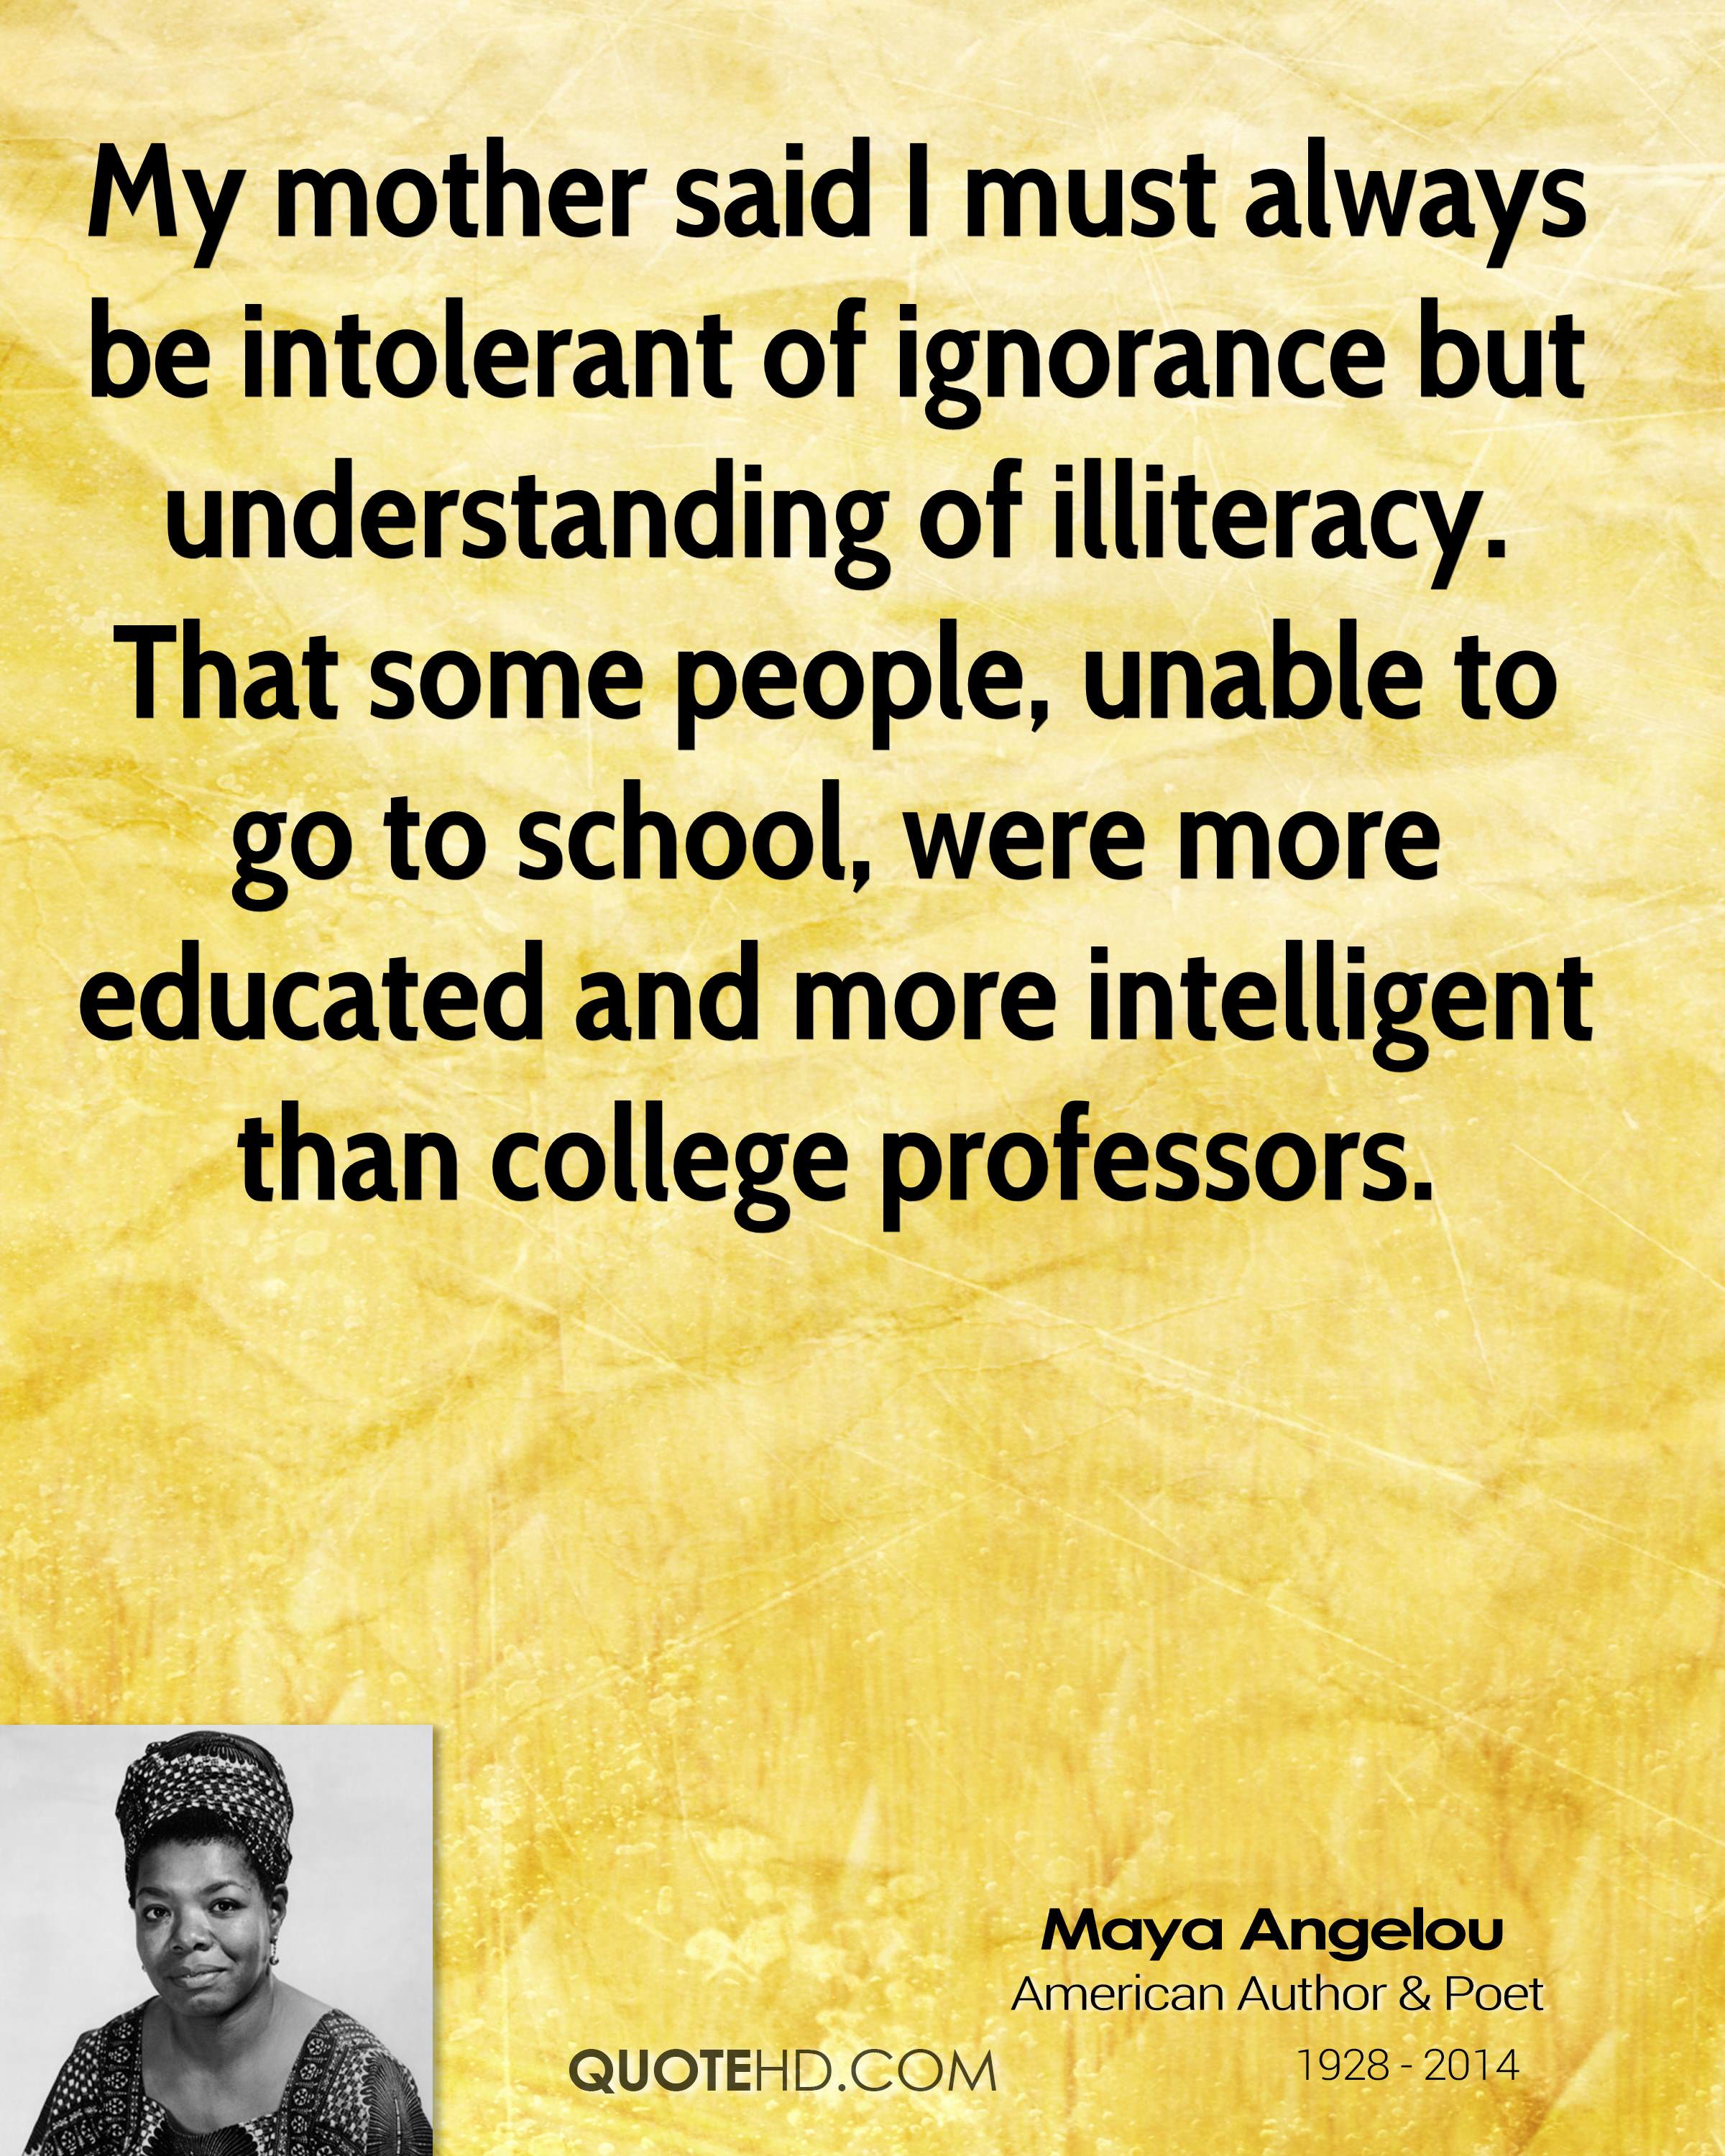 Maya Angelou Quotes On Education. QuotesGram